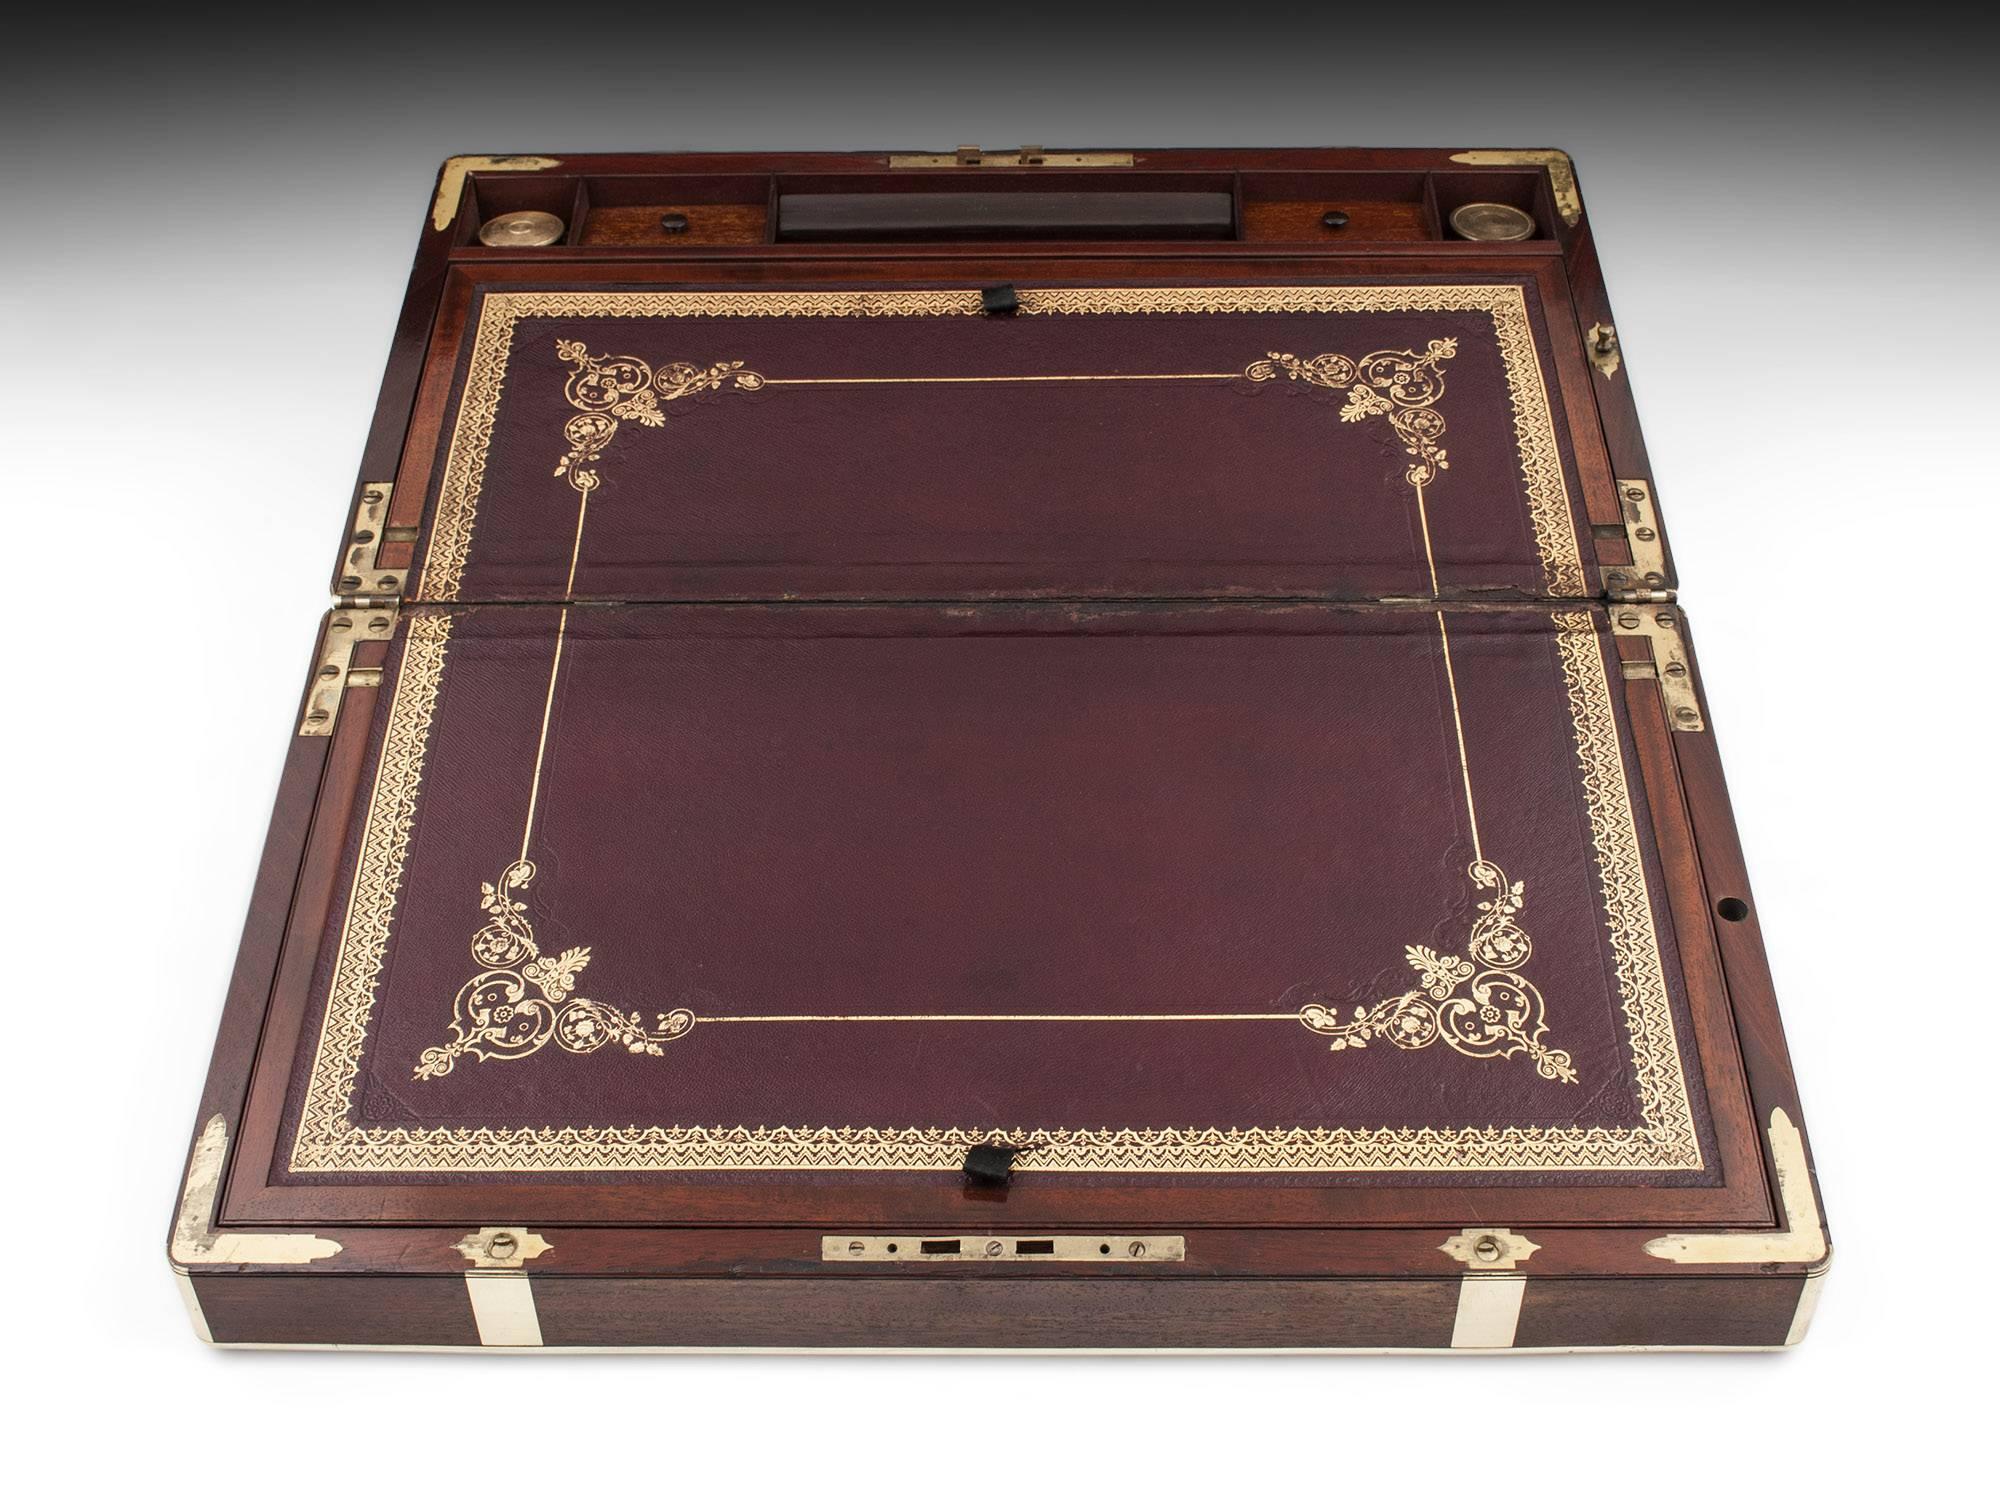 British Antique Mahogany Brass Bound Writing Box by Toulmin & Gale, 19th Century